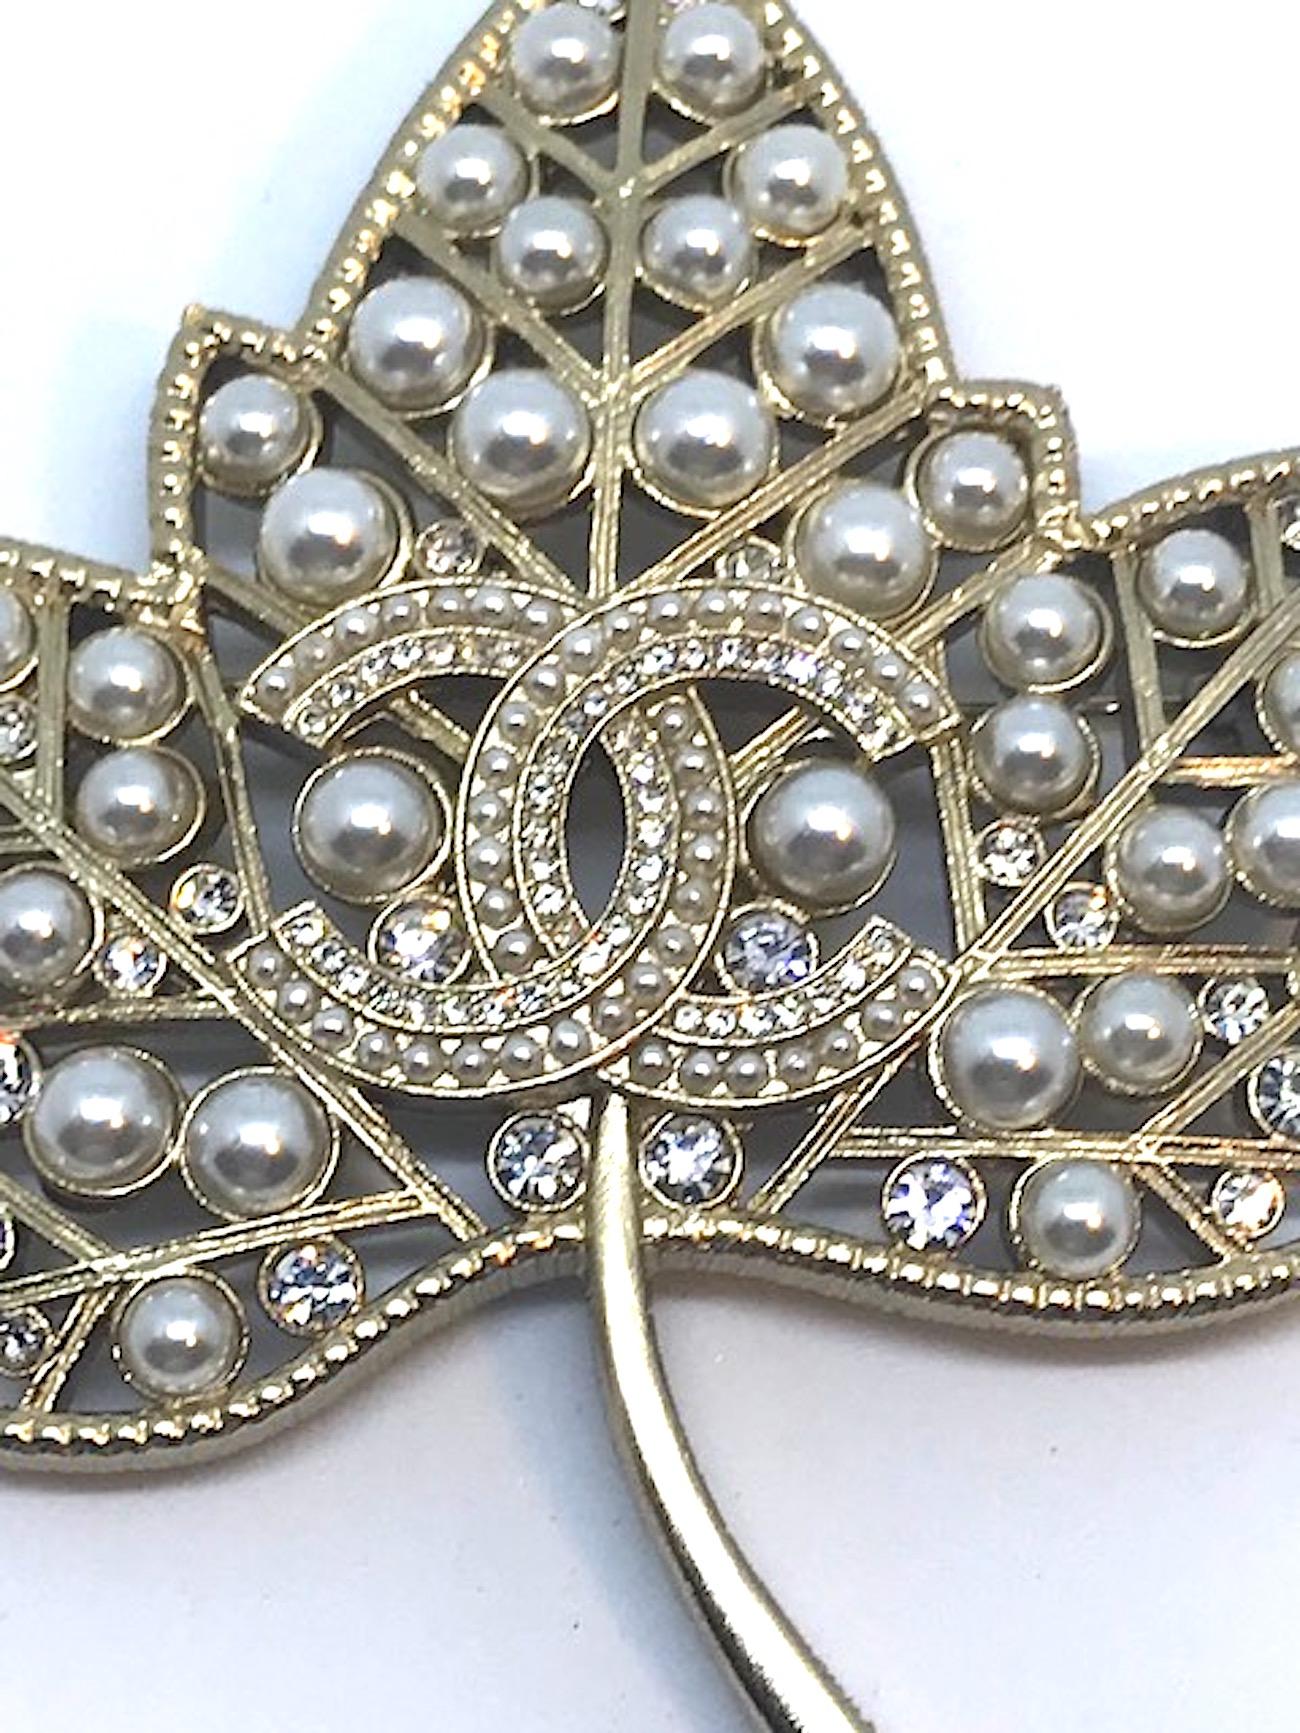 A beautiful and large Chanel pin in the form of a Sycamore leaf from the 2018 Spring collection. Cut out body, veins and stem of pin in satin gold and set with crystal rhinestones and faux pearls. Central interlocking CC logo set with mini seed